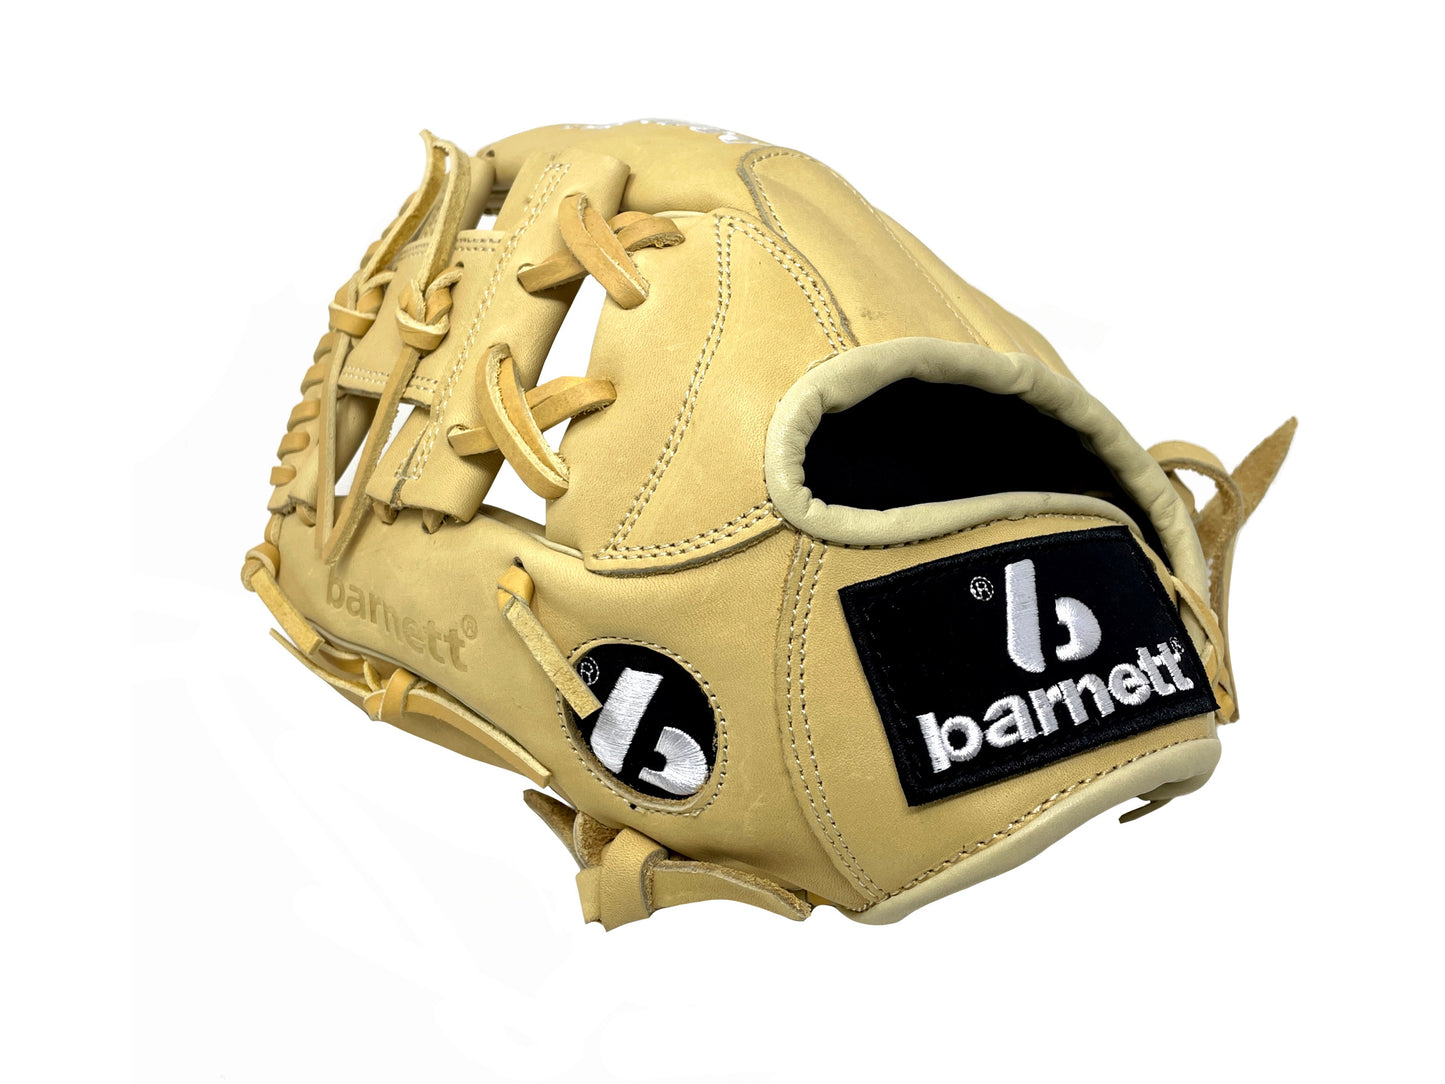 FL-115 Baseball glove, high quality, leather, infield/outfield 11.5", Beige